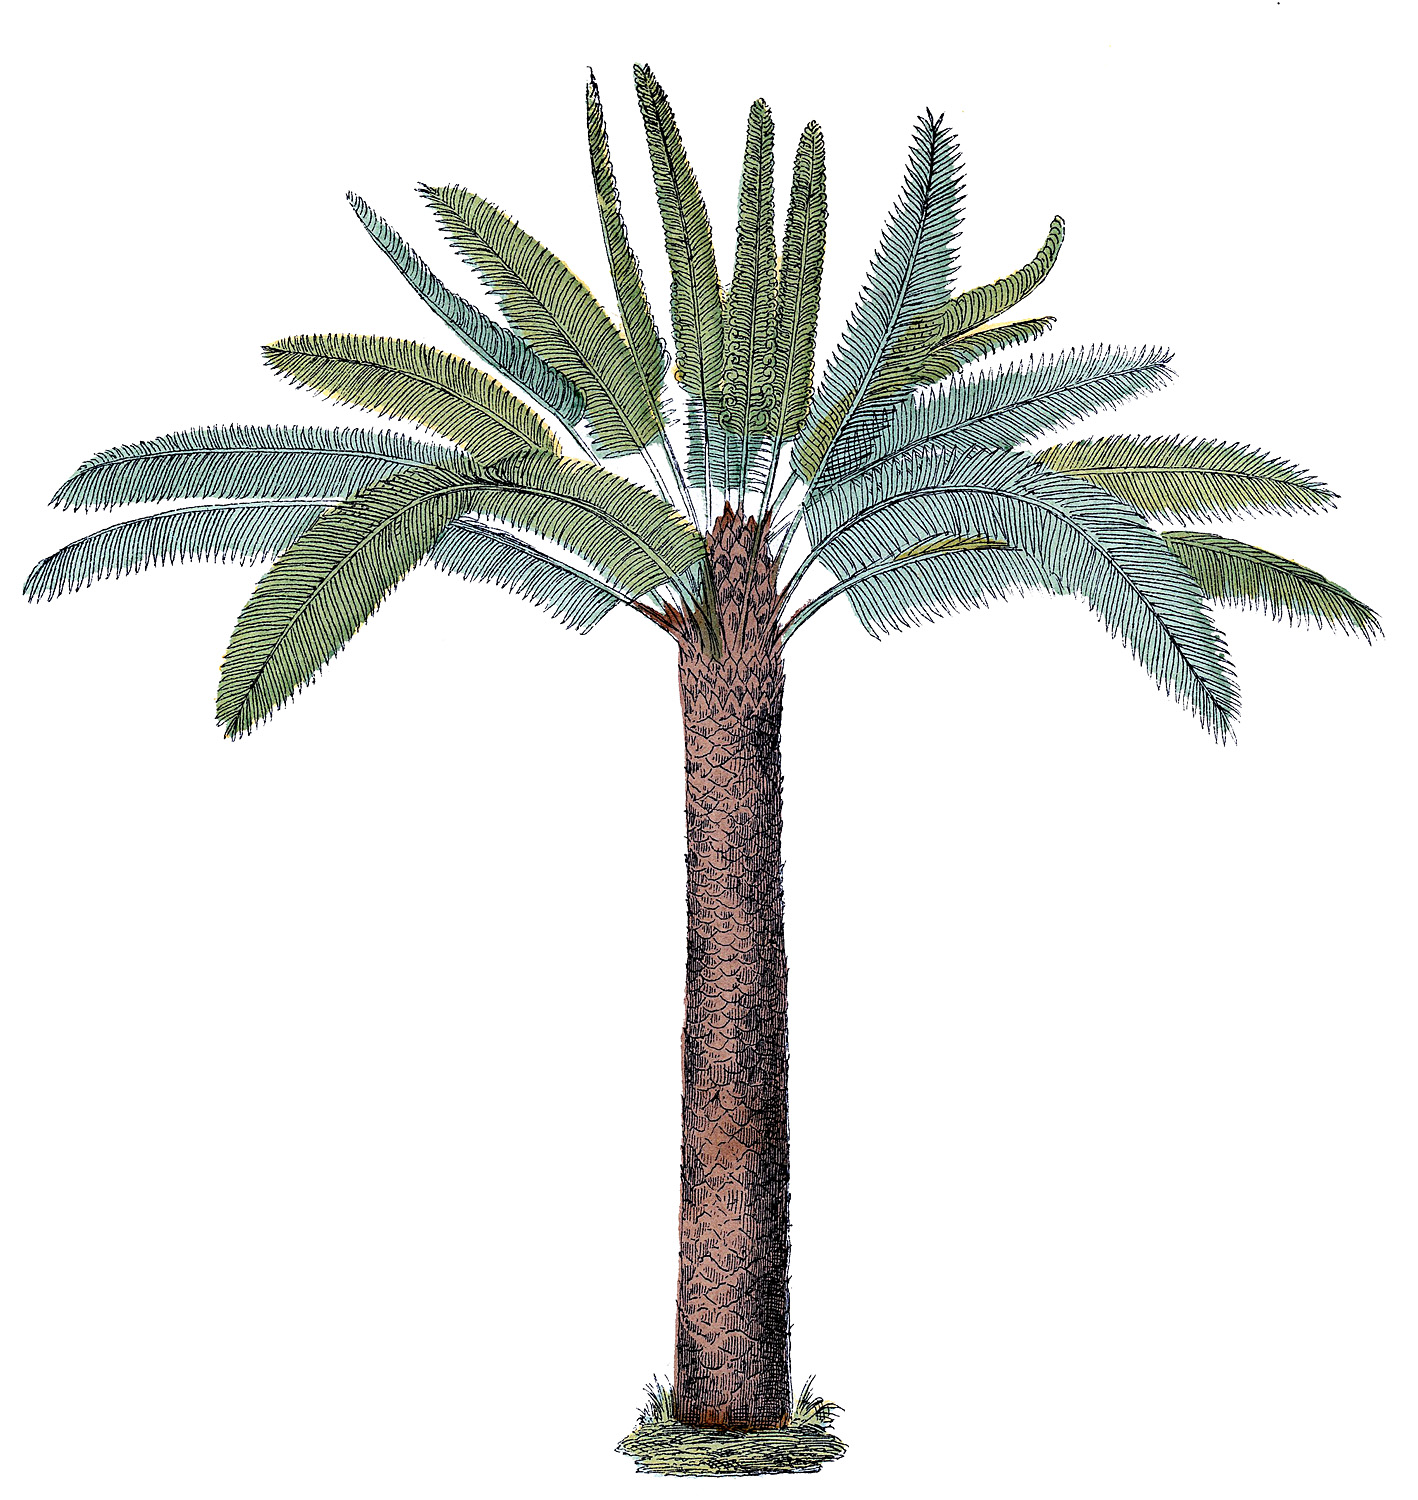 Vintage Palm Tree Graphic  The Graphics Fairy